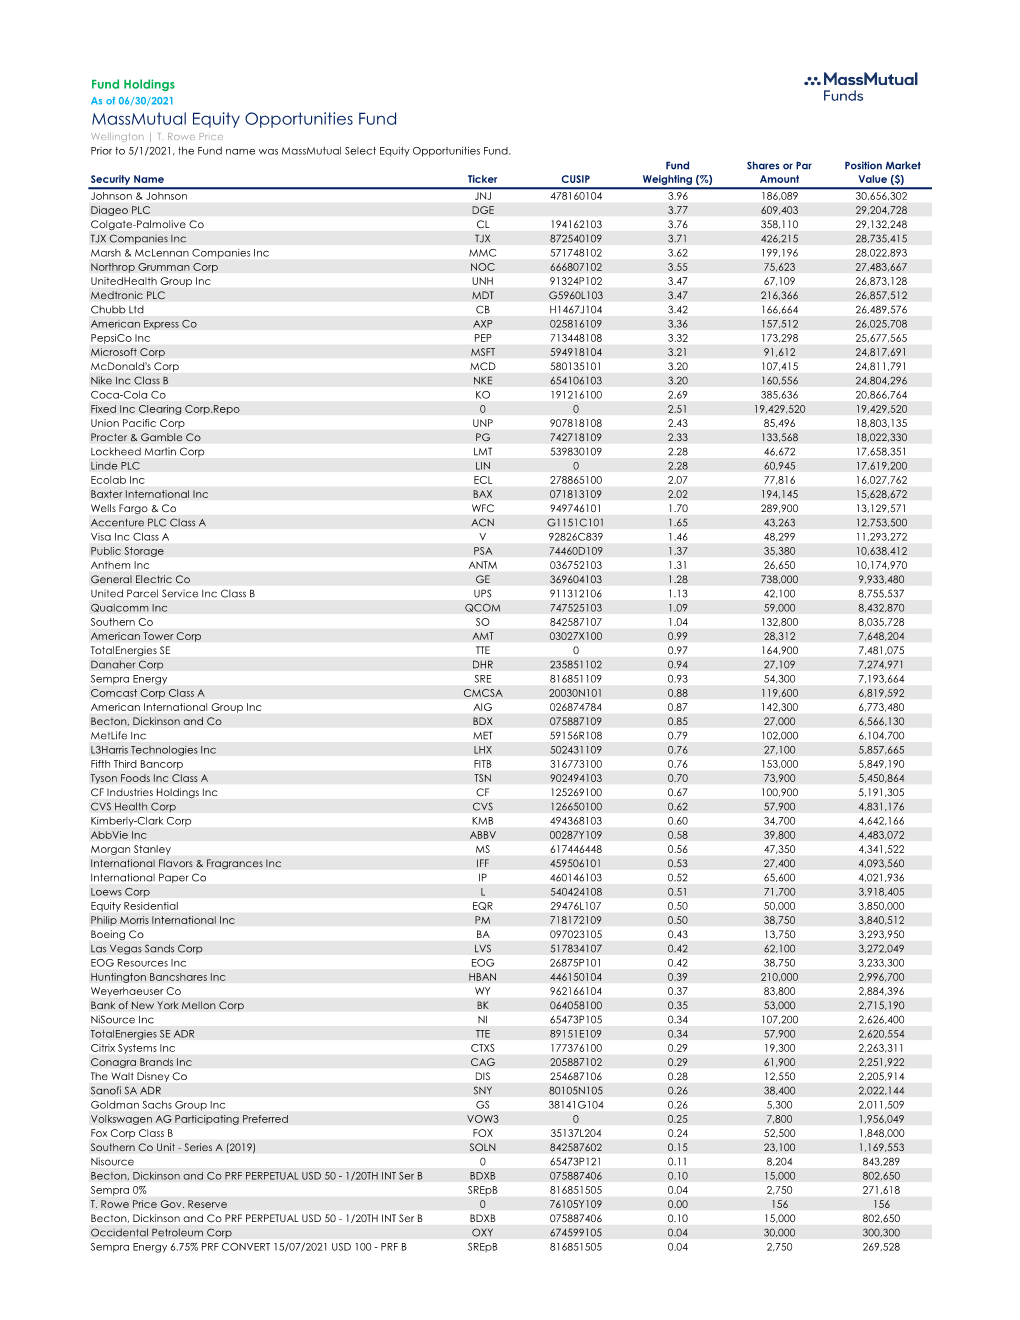 Fund Holdings As of 06/30/2021 Massmutual Equity Opportunities Fund Wellington | T